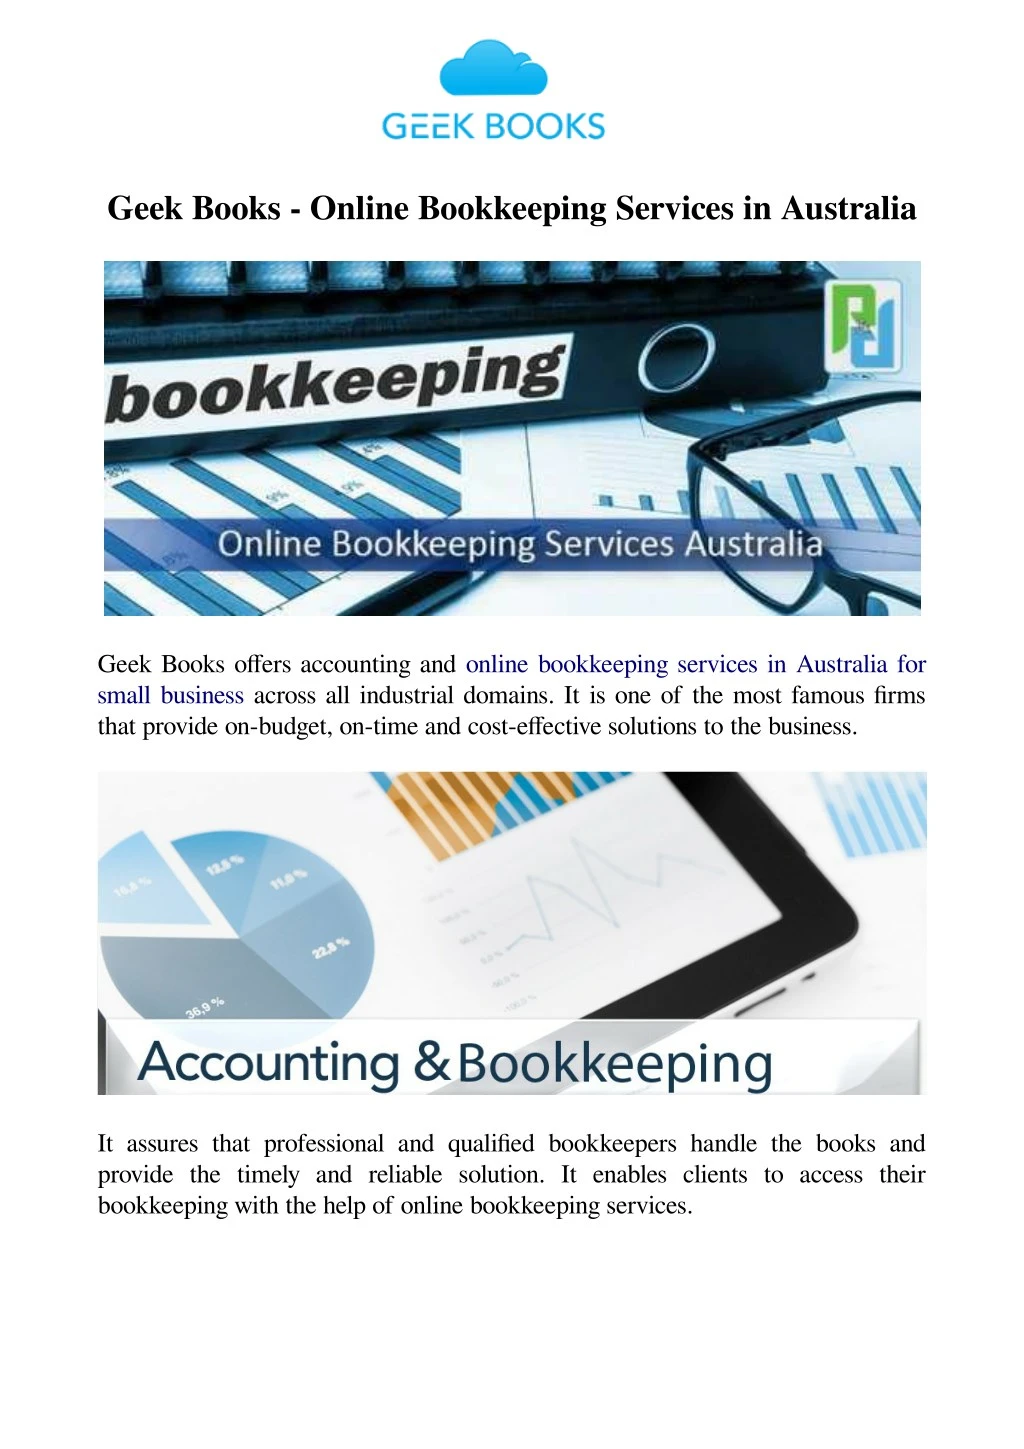 geek books online bookkeeping services